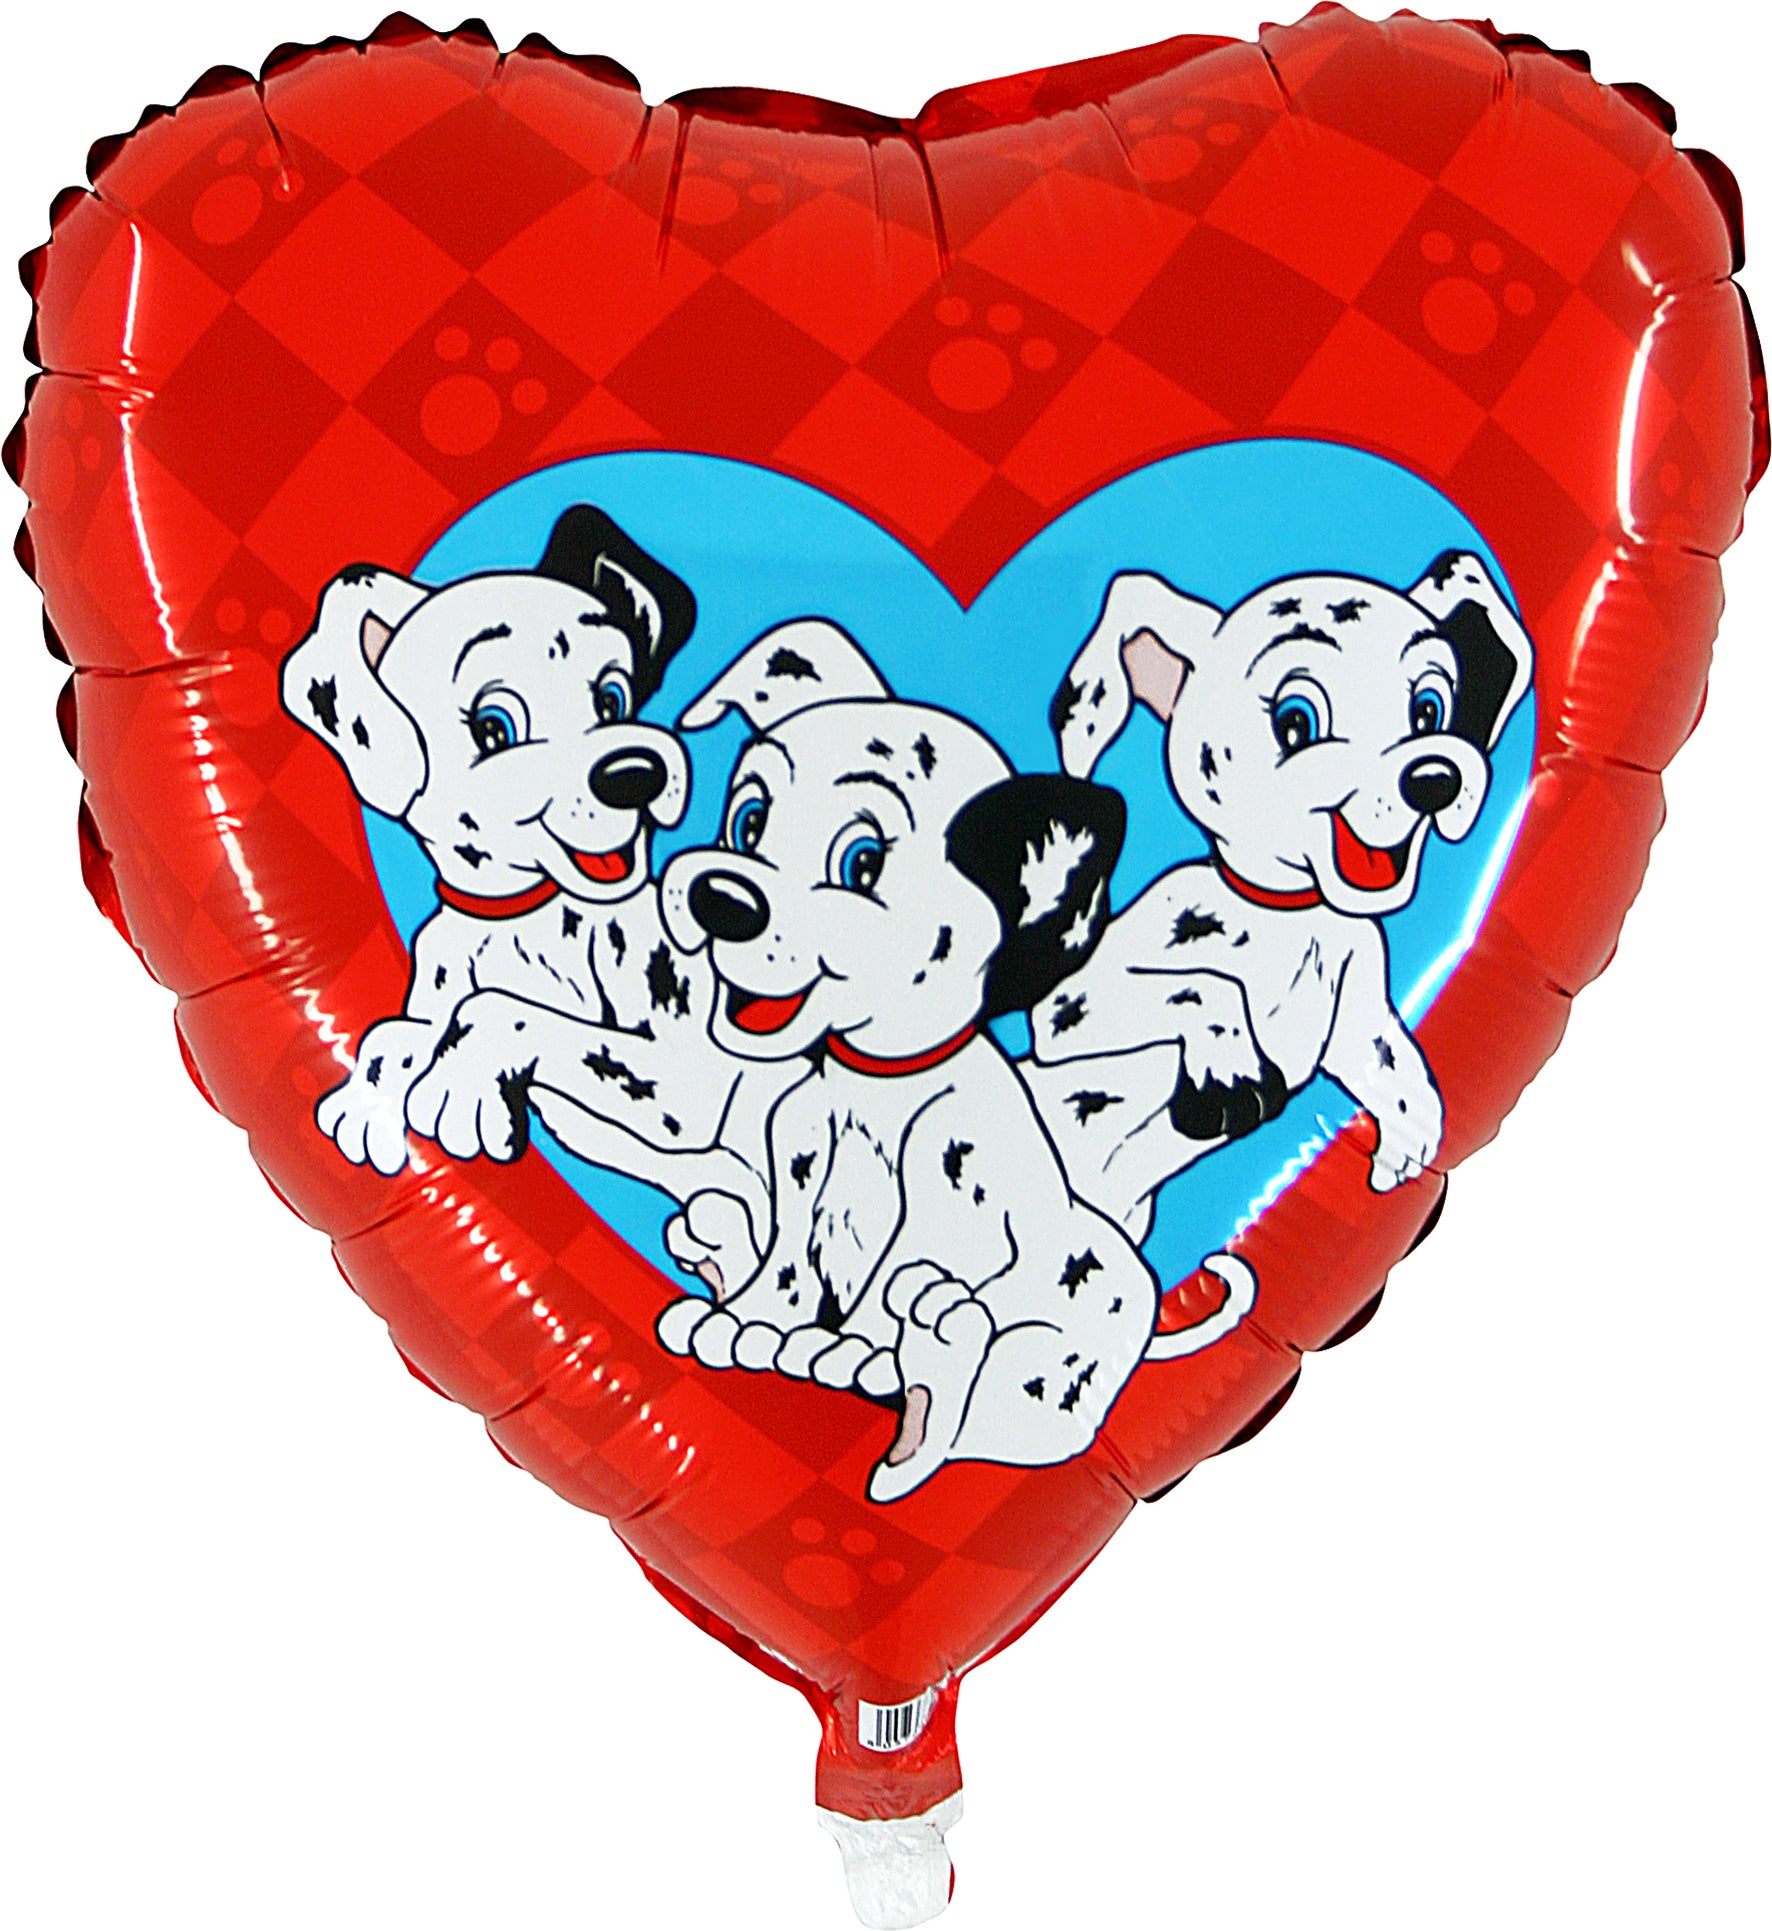 red heart shaped balloon with dalmatians